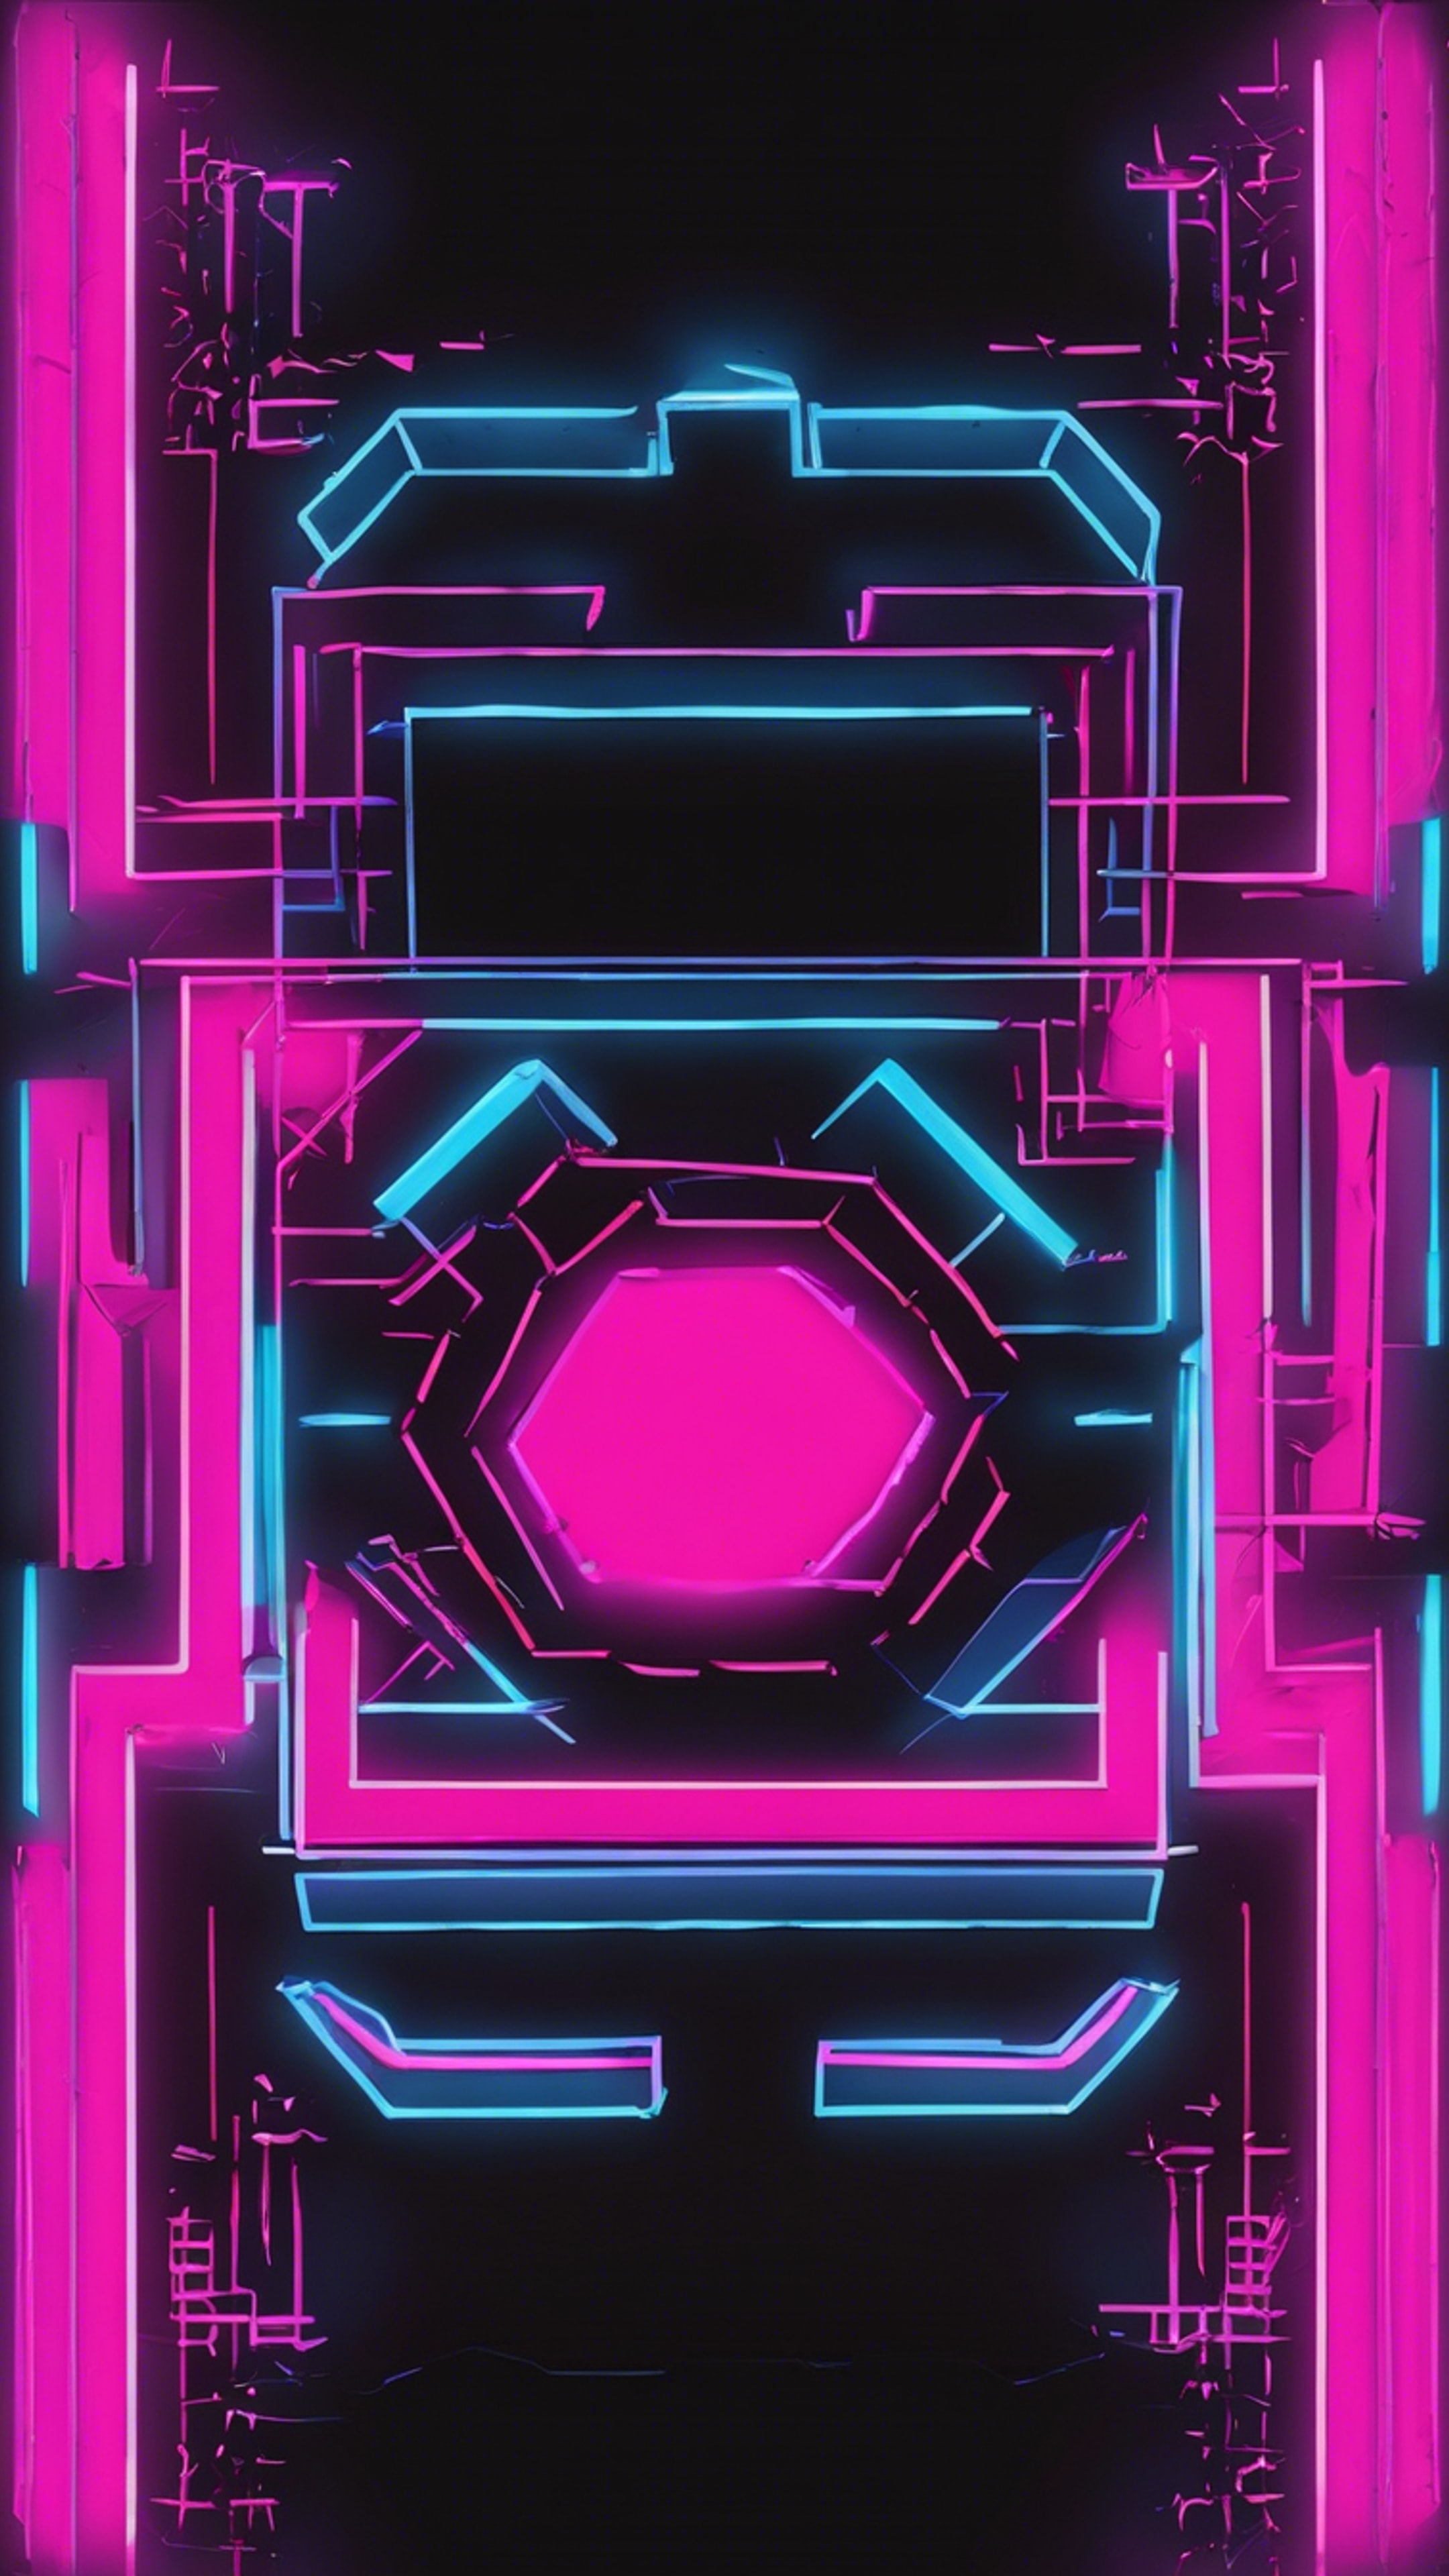 Bright neon pink and blue geometric shapes against a black background, reminiscent of 80s arcade games. Tapetai[dd42a0f55e3e425295c8]